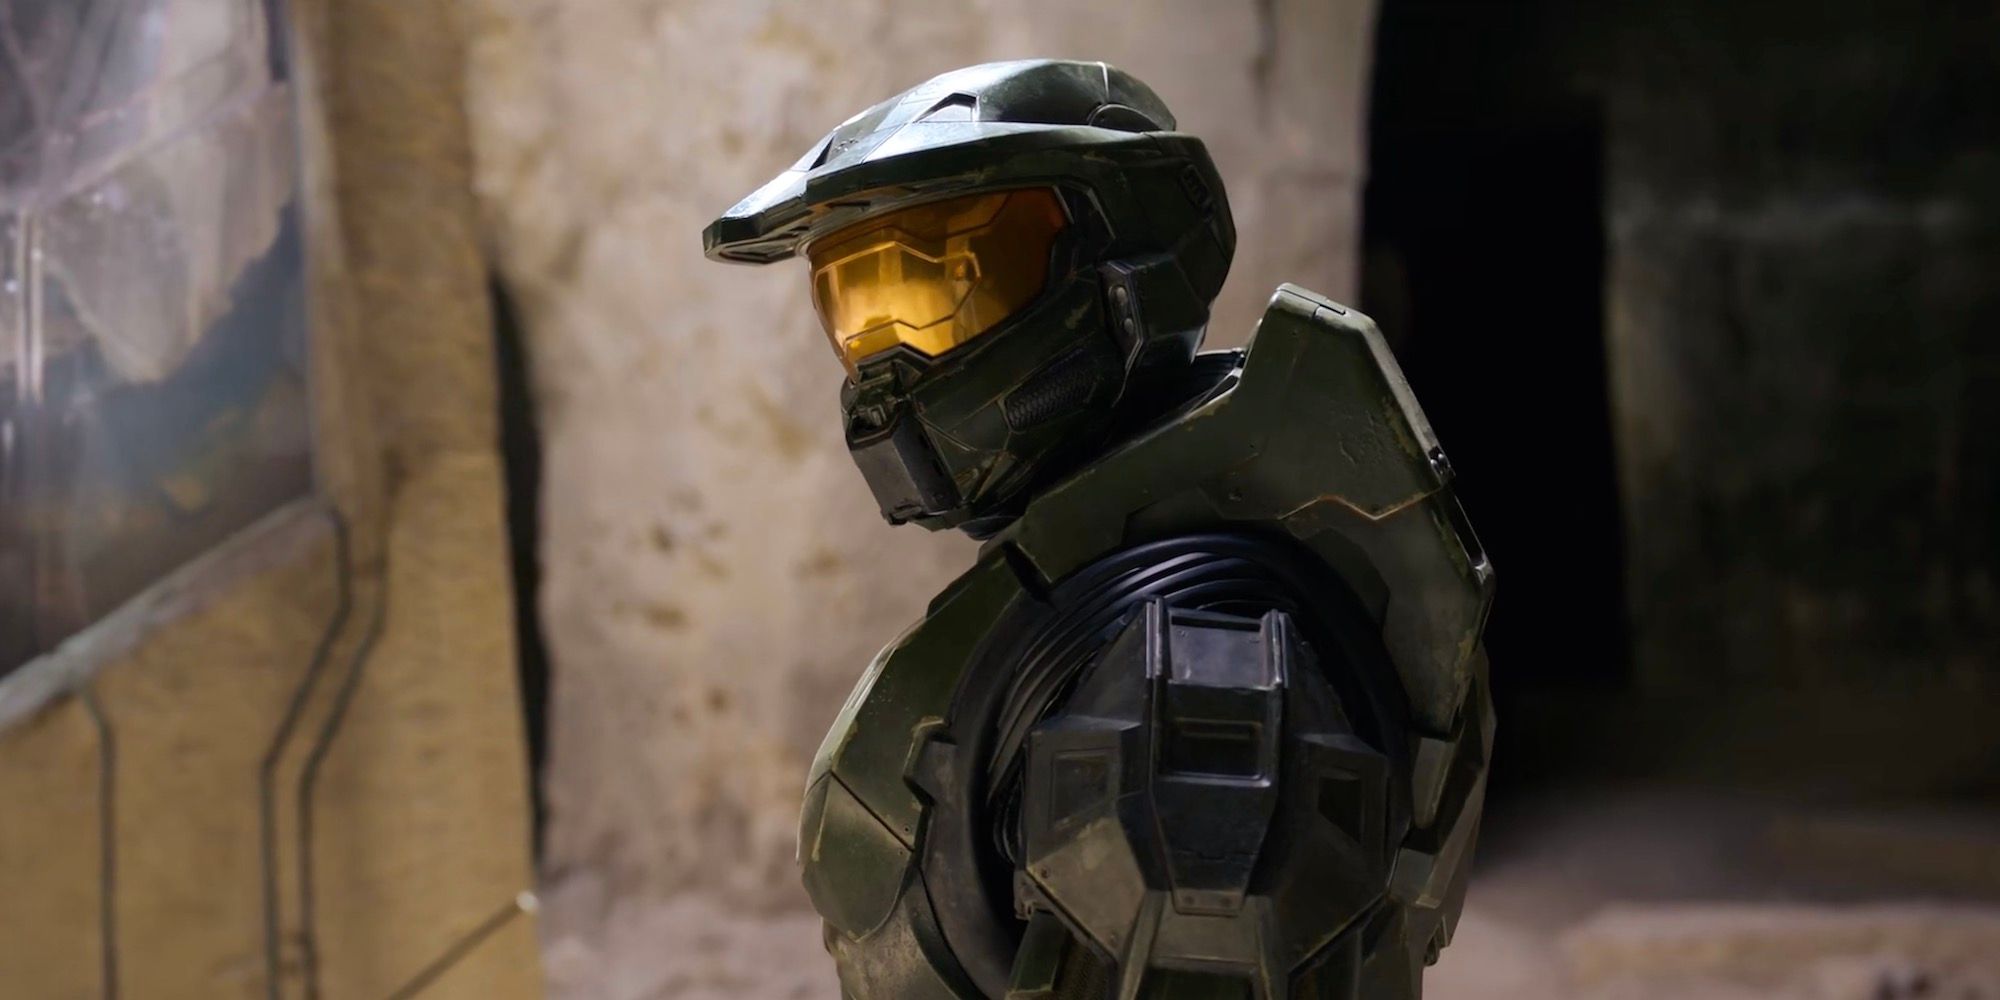 Master Chief from the Halo TV show